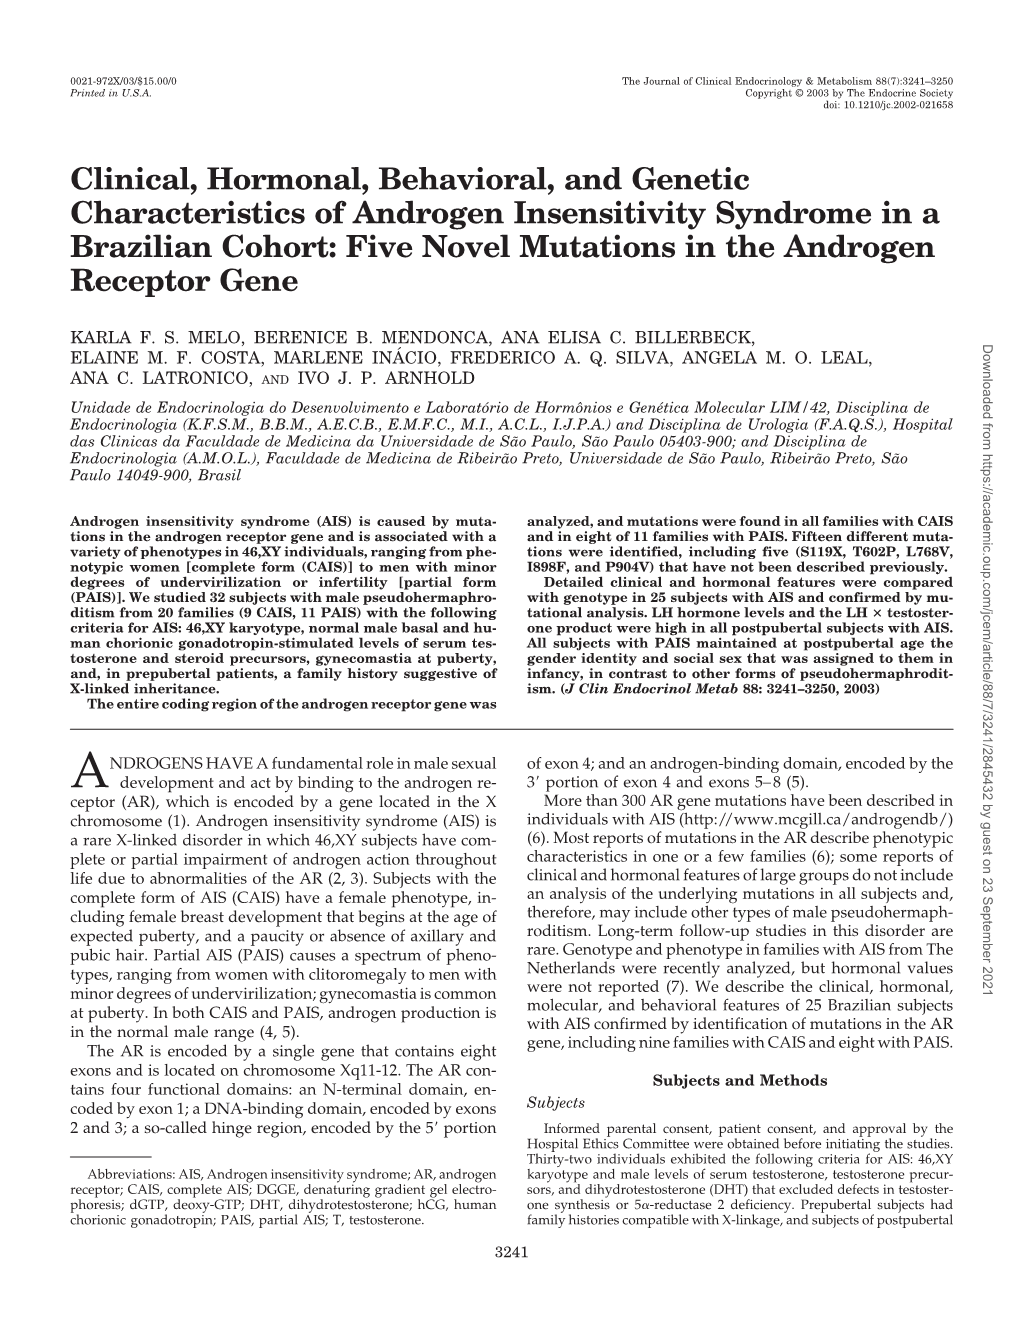 Clinical, Hormonal, Behavioral, and Genetic